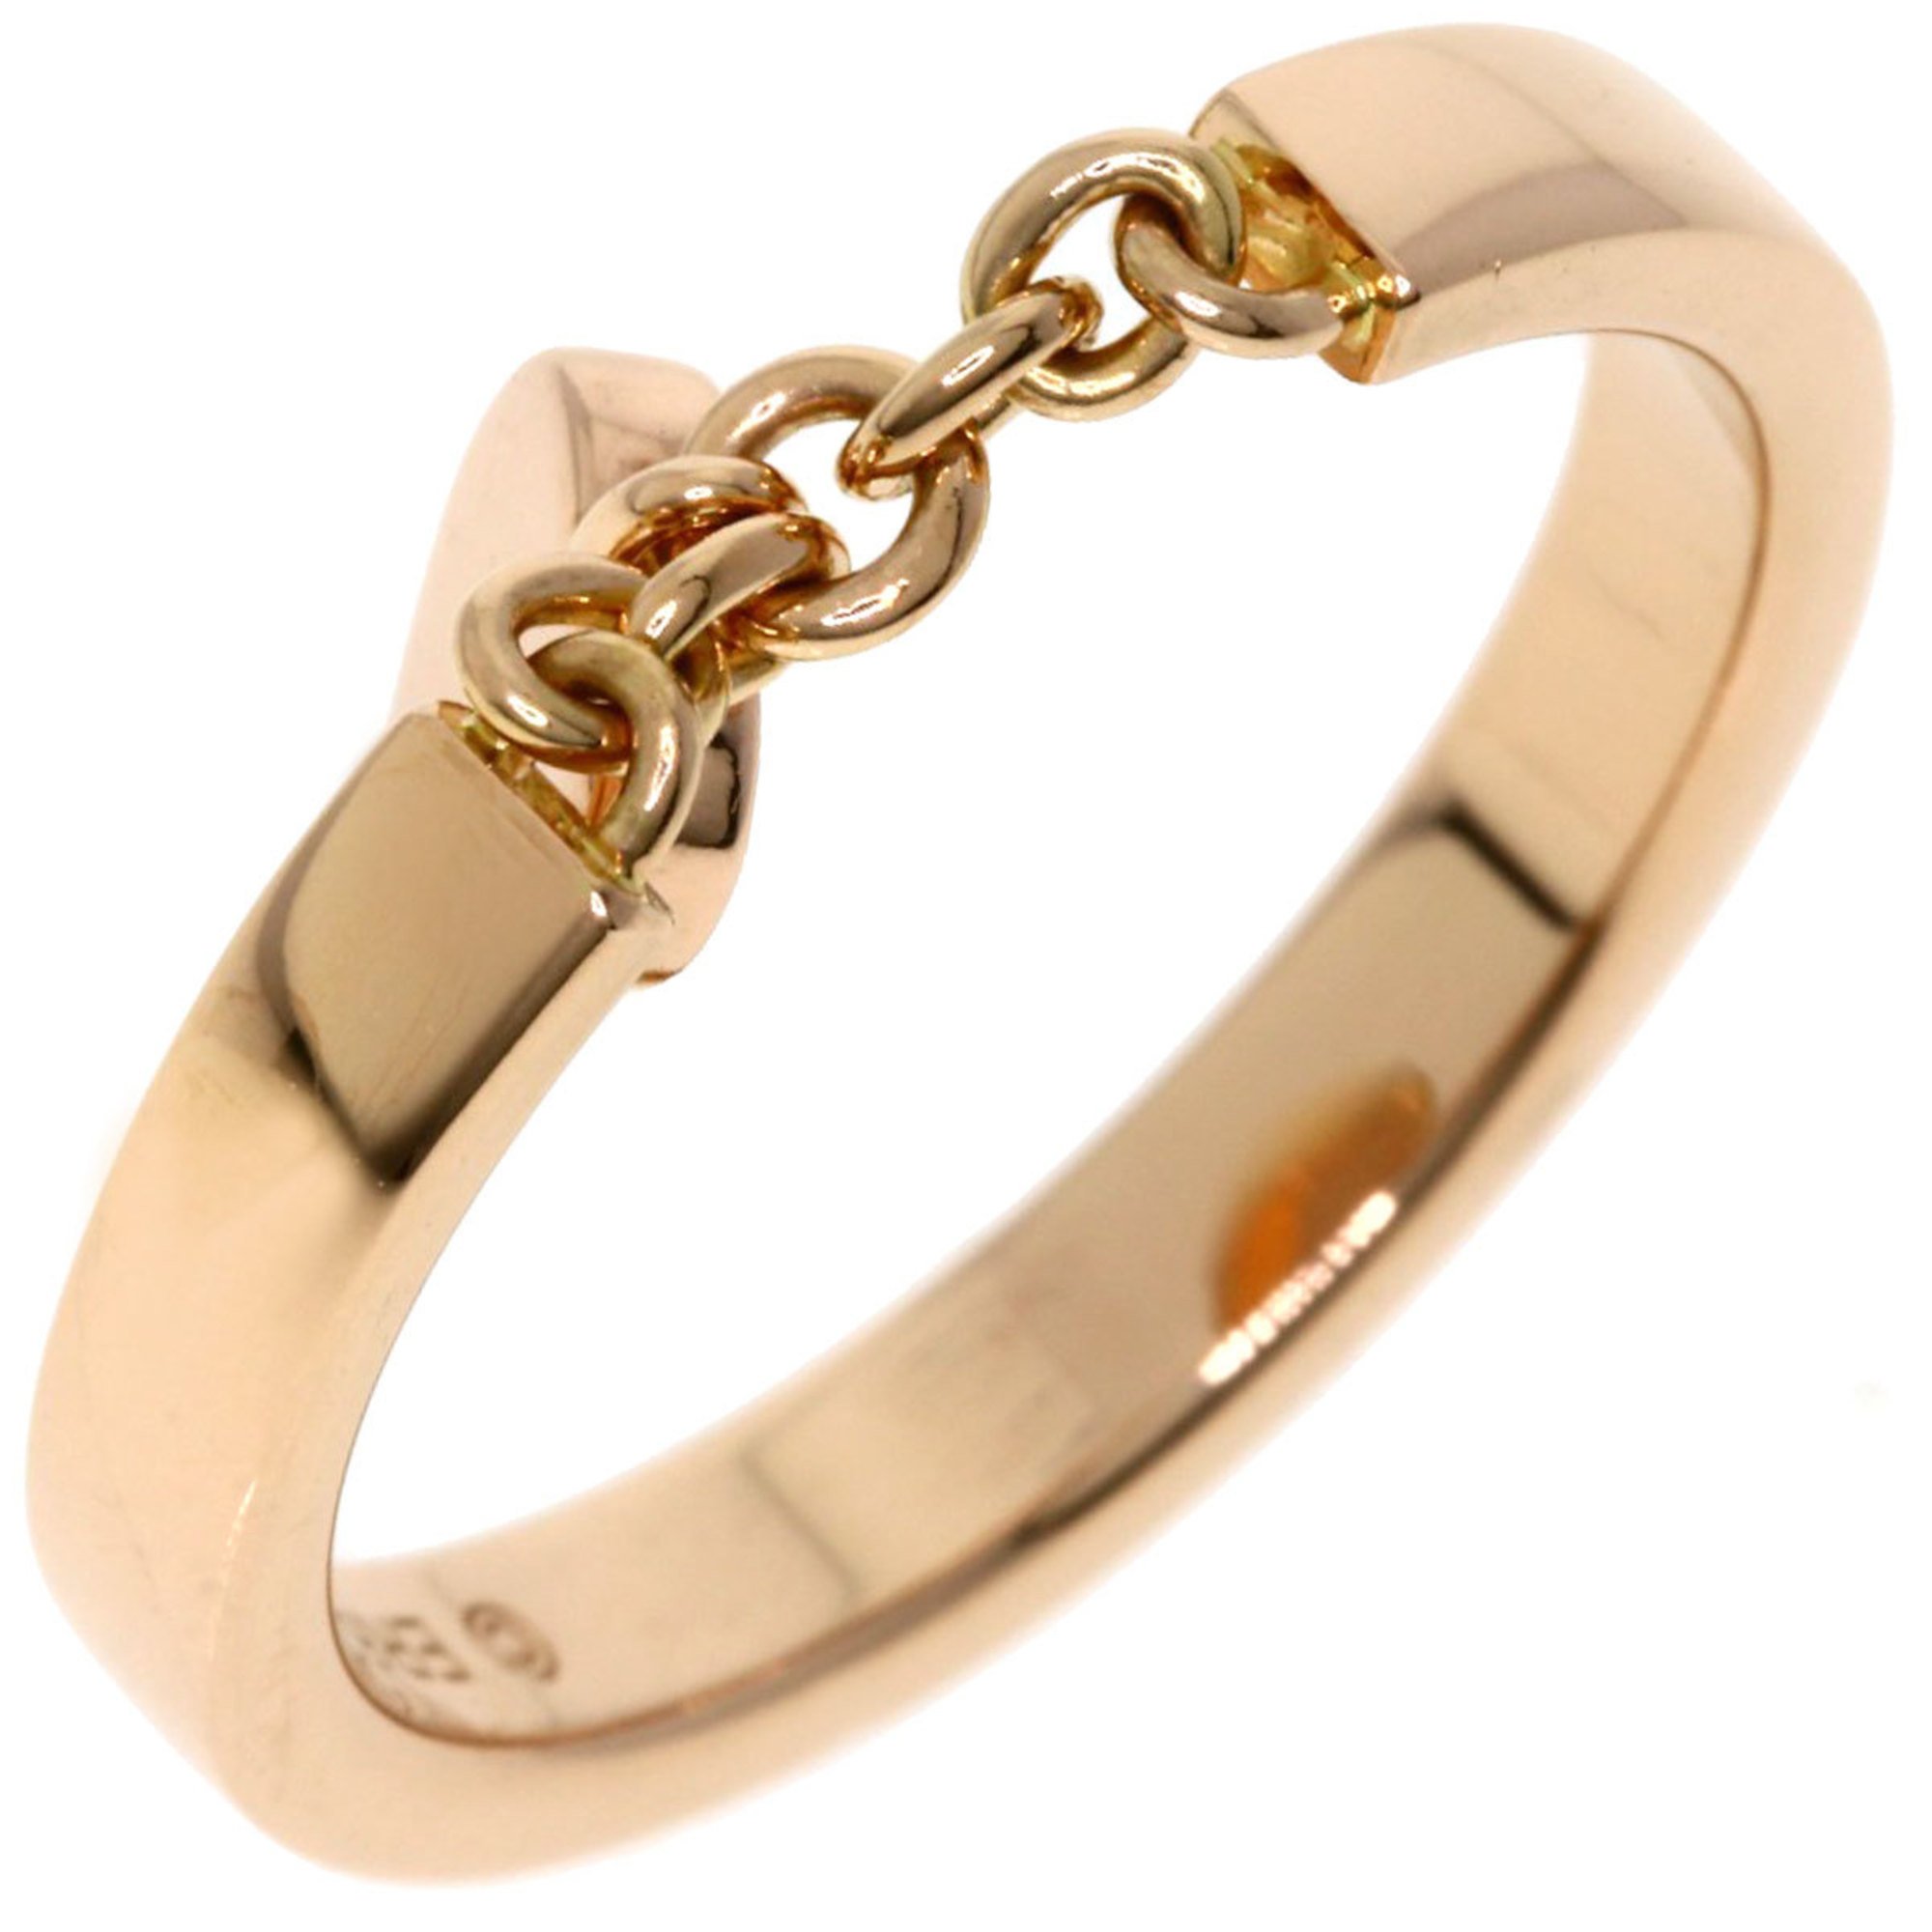 Cartier Mon Amour Ring #49 Ring, 18K Pink Gold, Women's, CARTIER